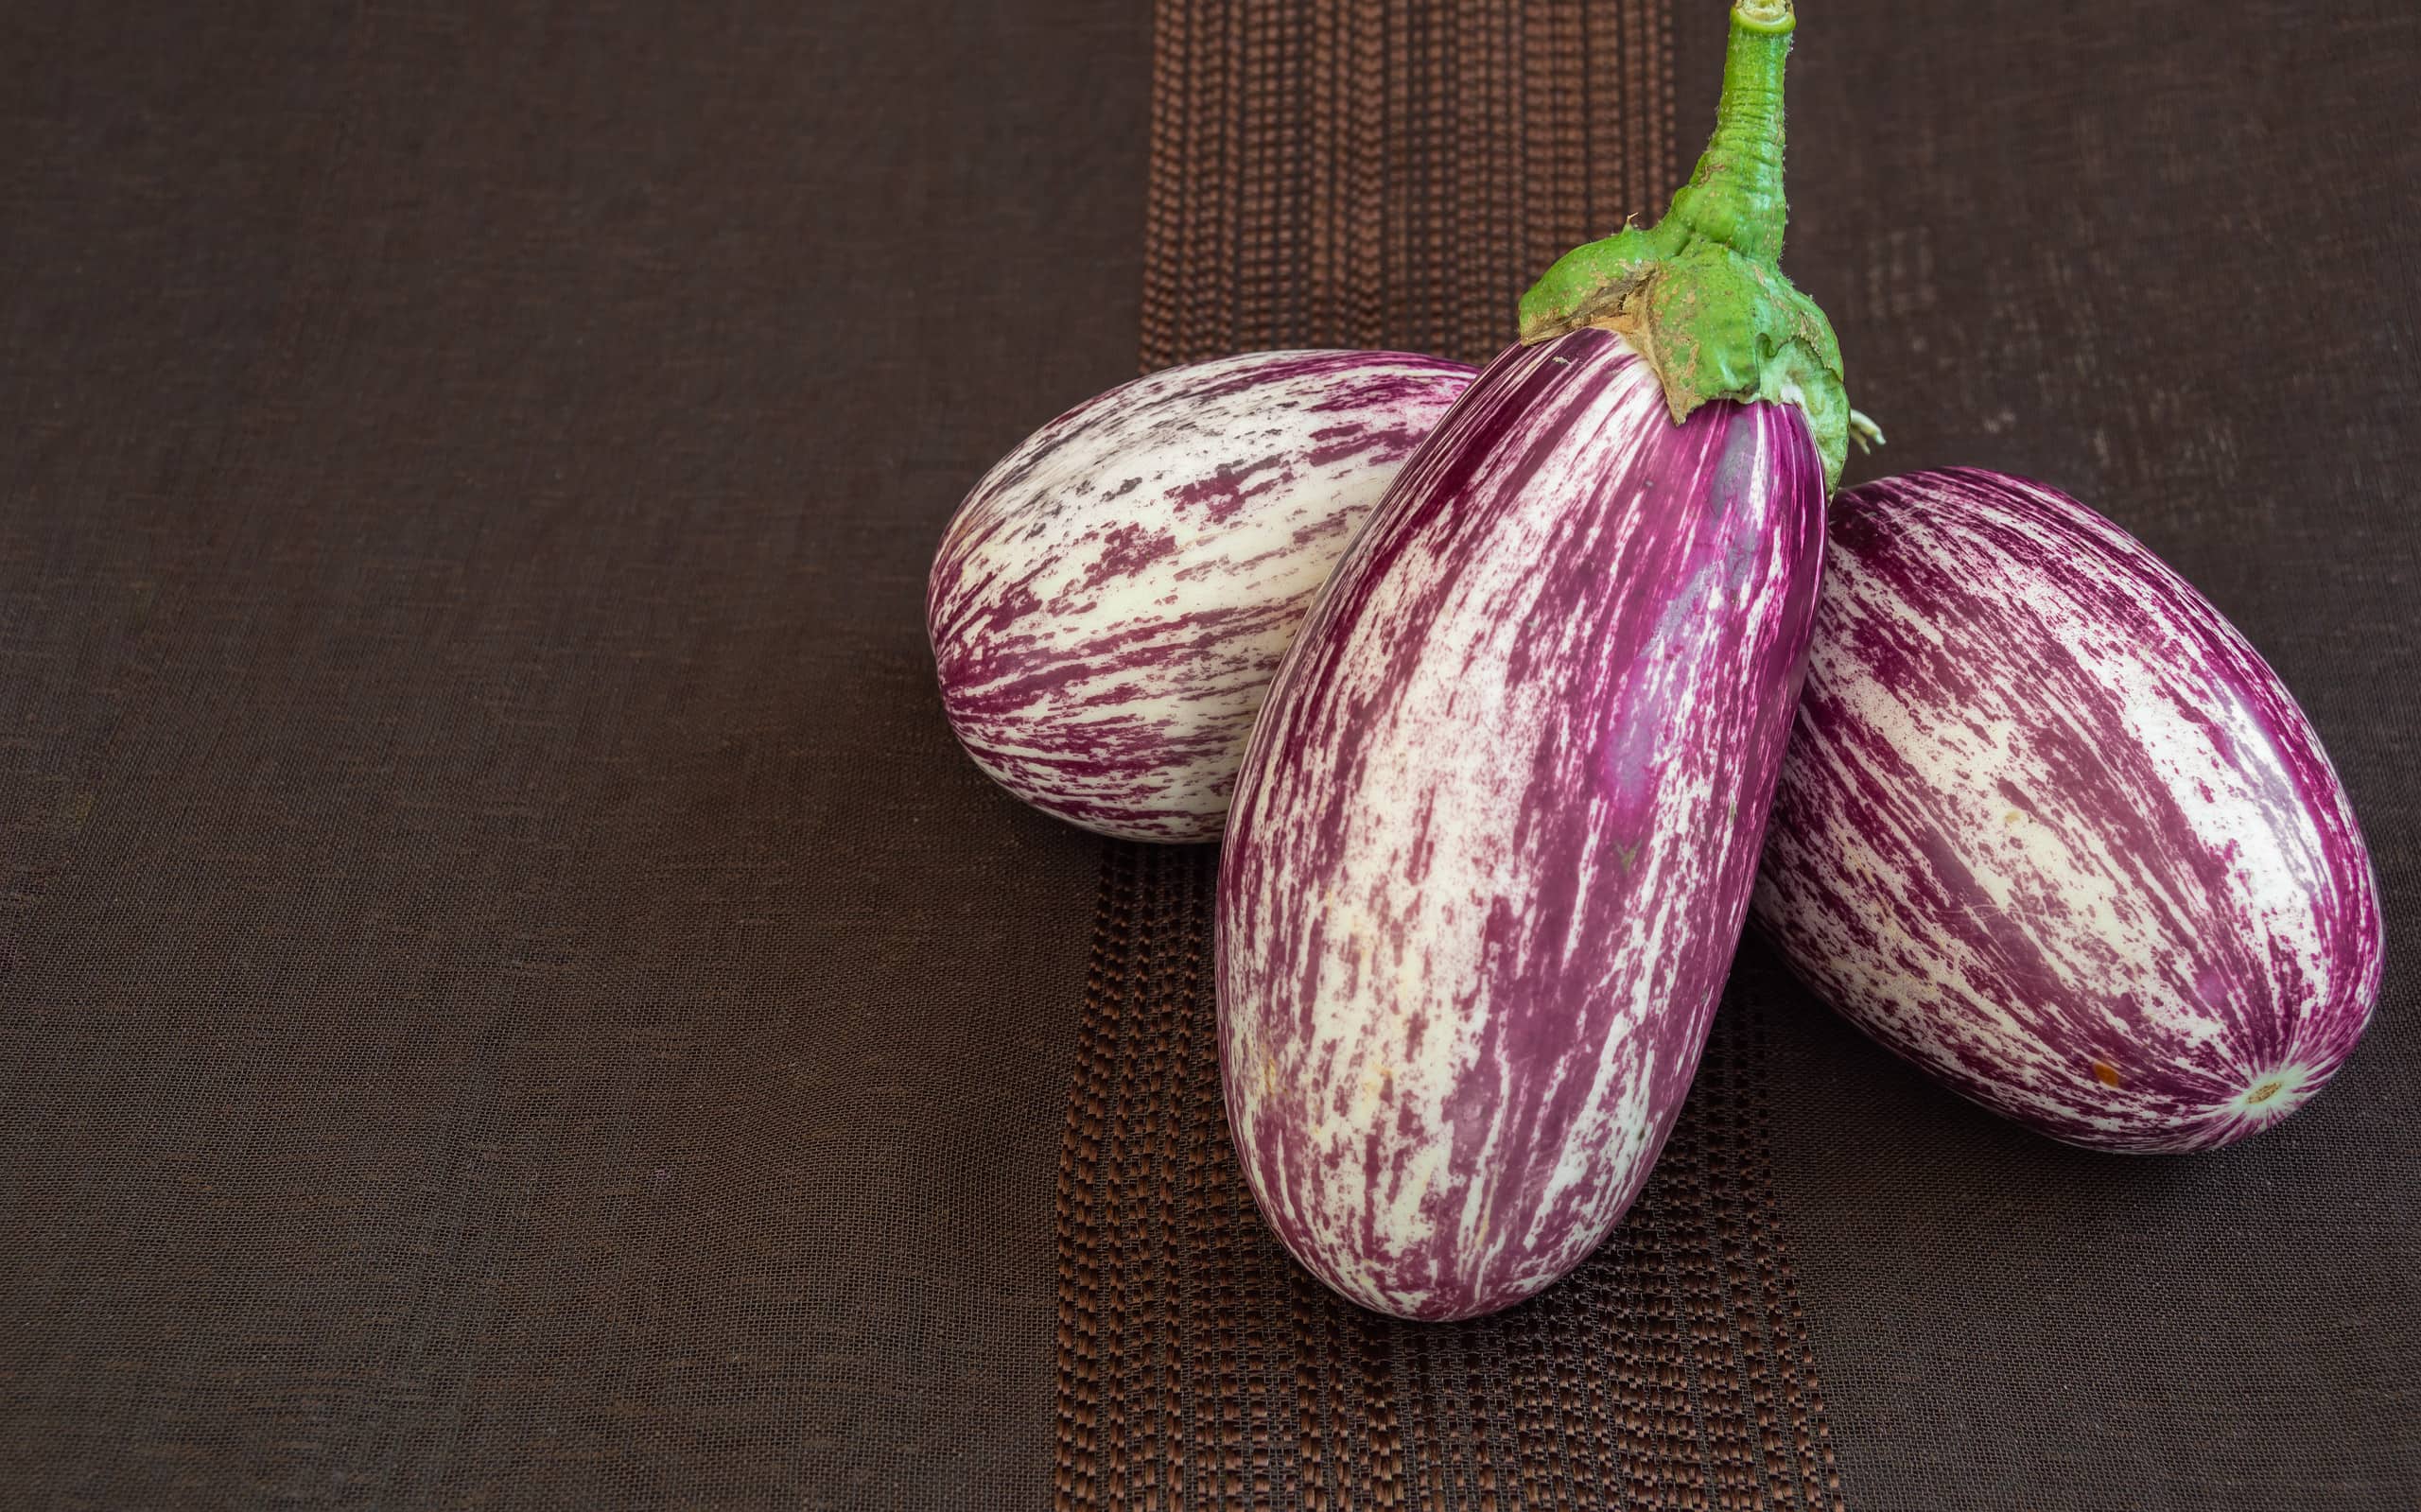 Fresh organic eggplants on dark fabric background. Strange variety of the vegetable called zebra, scratched or sicilian. Copy space left.